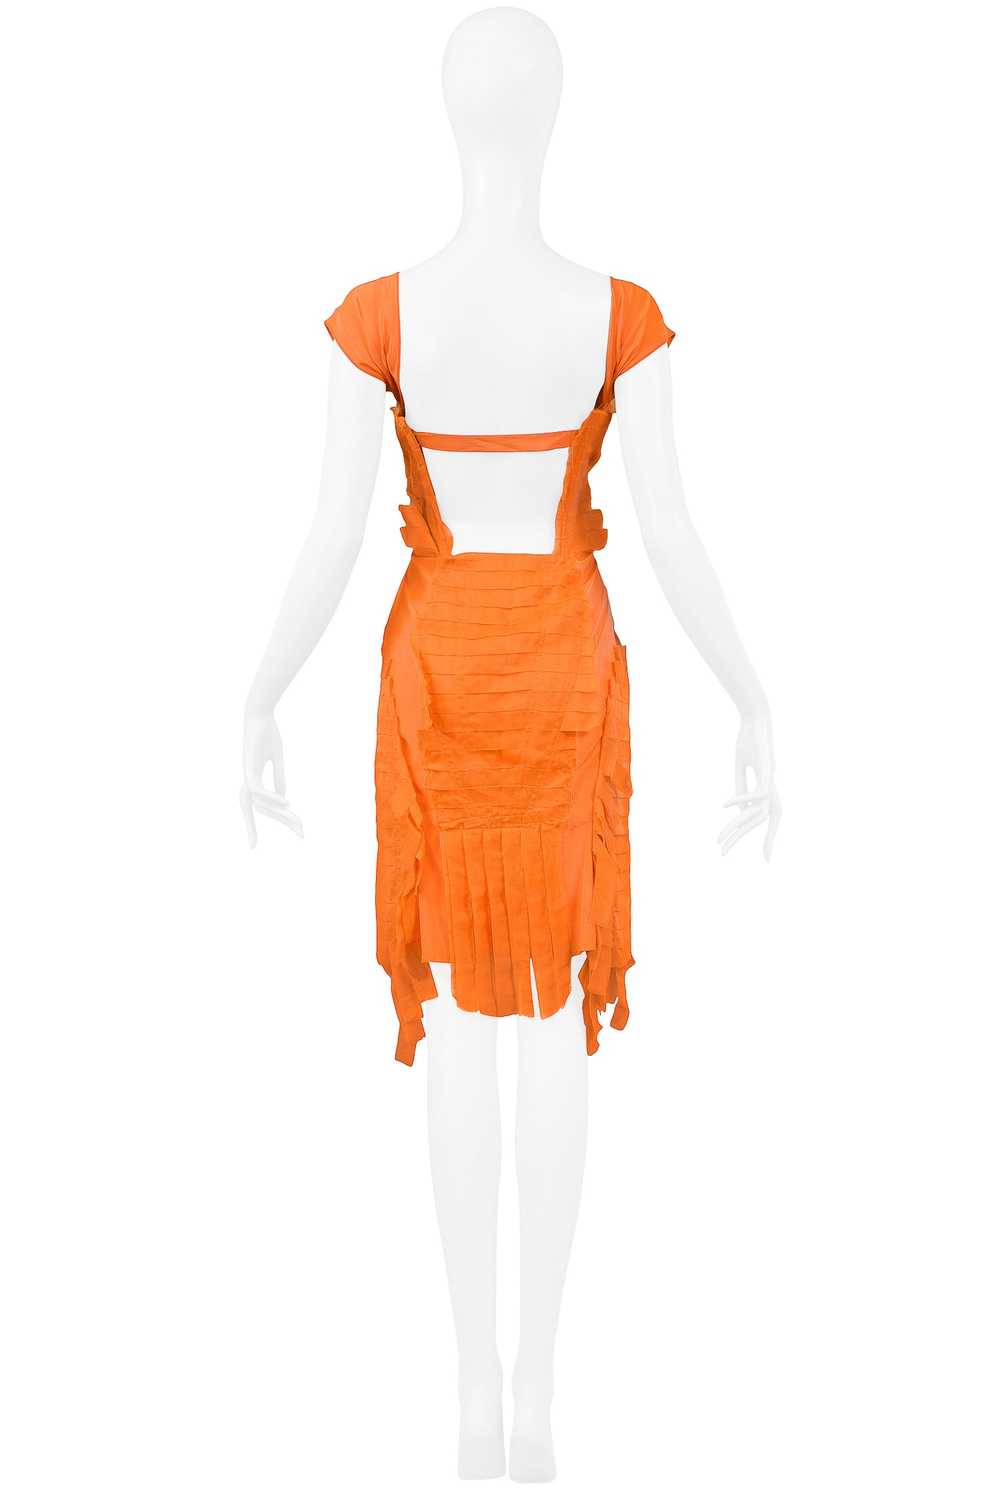 GUCCI BY TOM FORD ORANGE SILK COCKTAIL DRESS 2004 - image 9